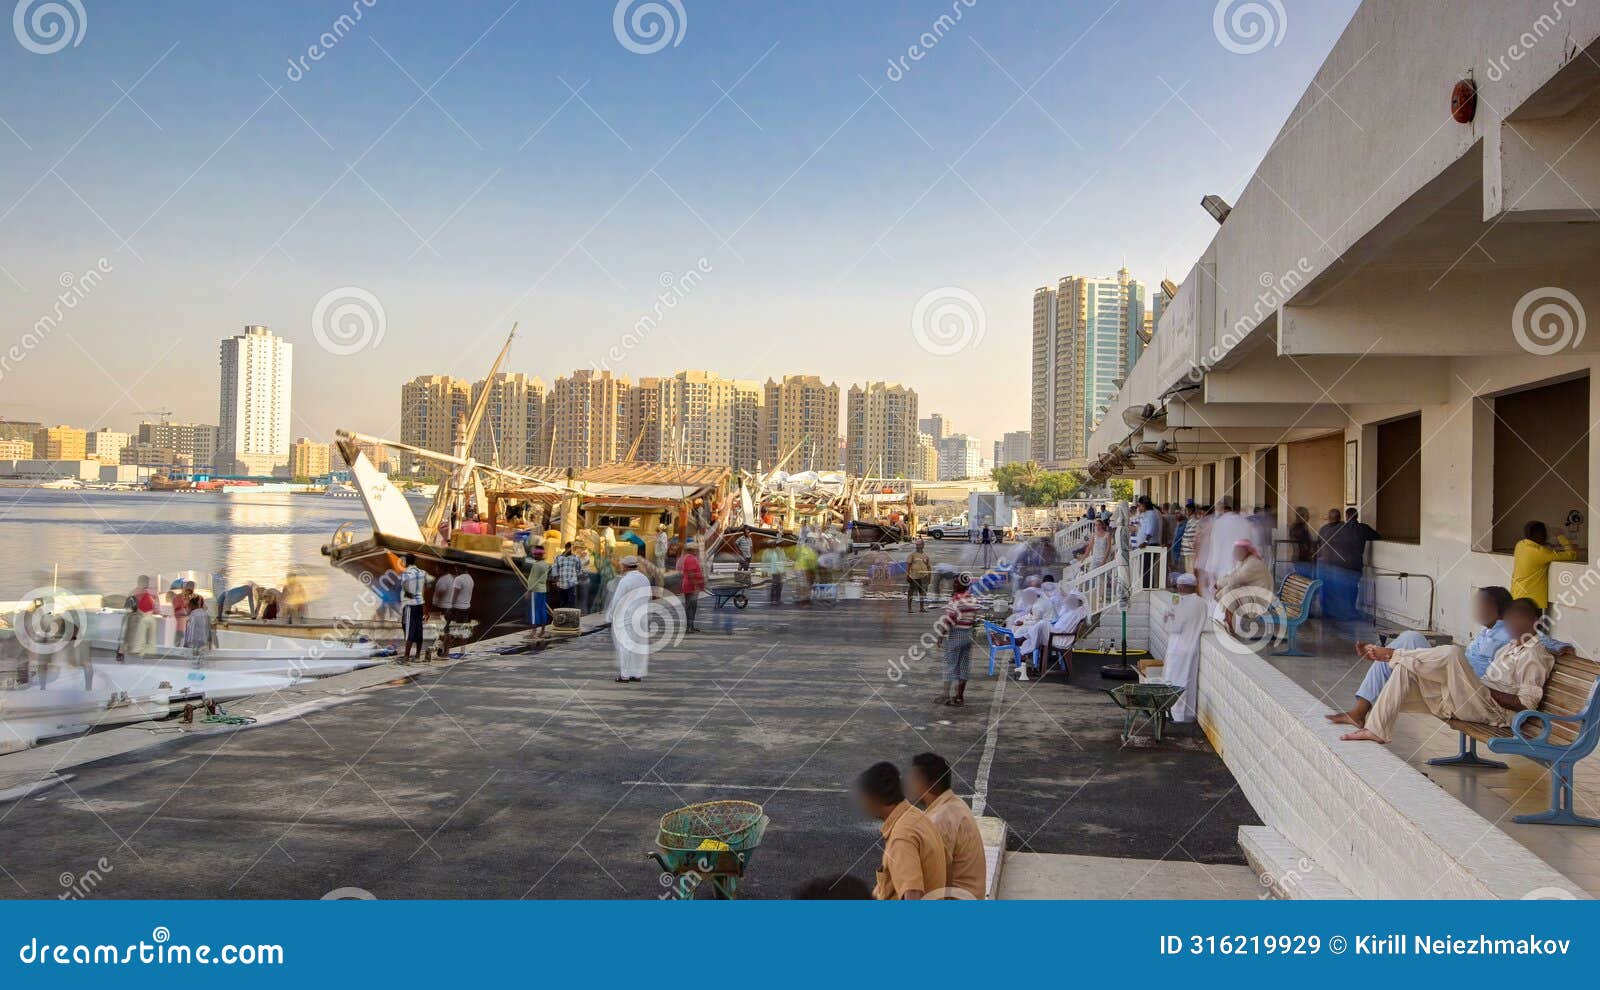 seafood at the fish market in ajman timelapse